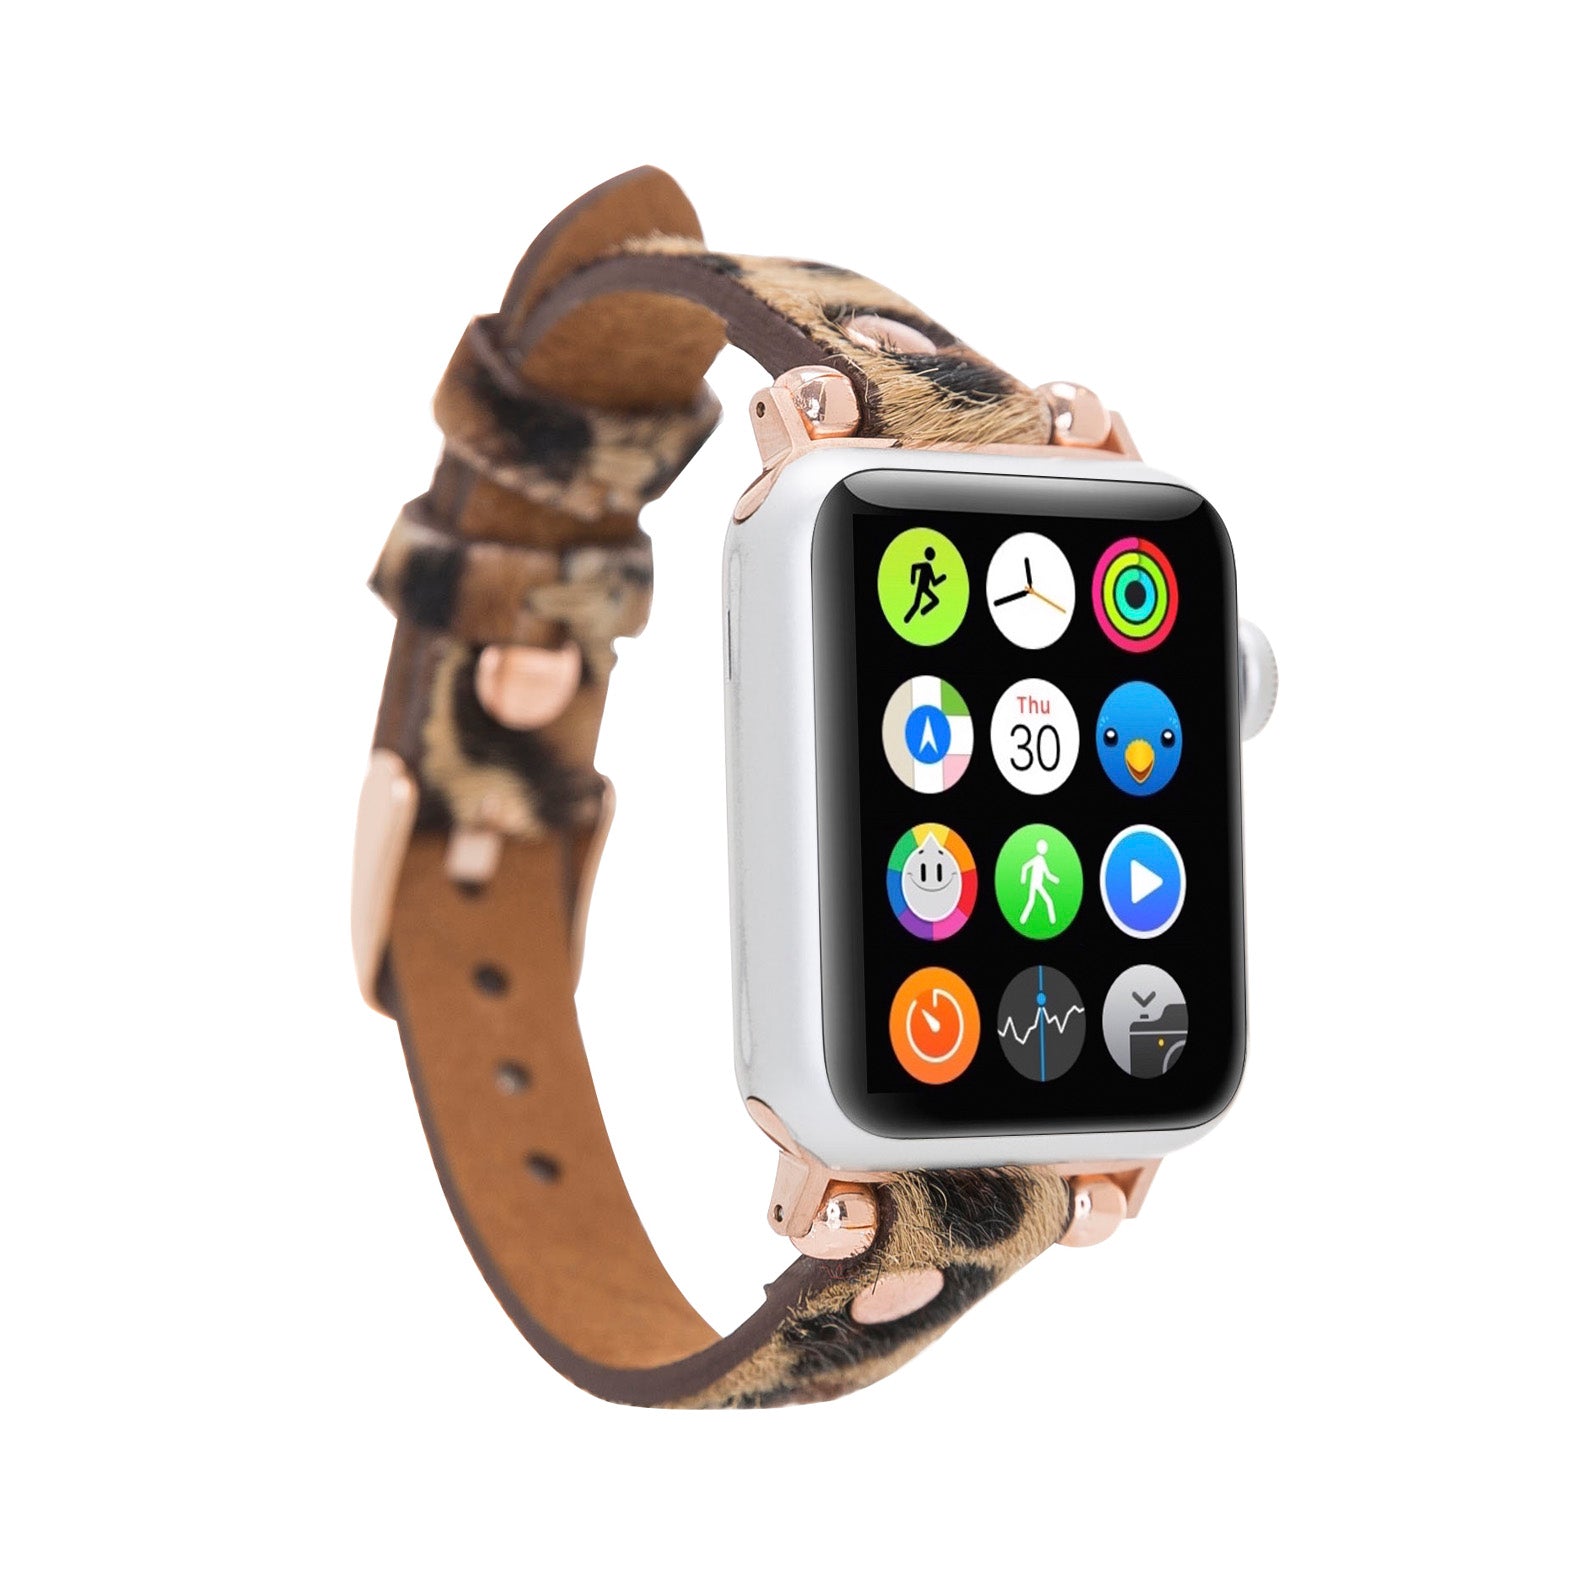 Ferro Strap - Full Grain Leather Band for Apple Watch - FURRY LEOPARD PATTERNED - saracleather